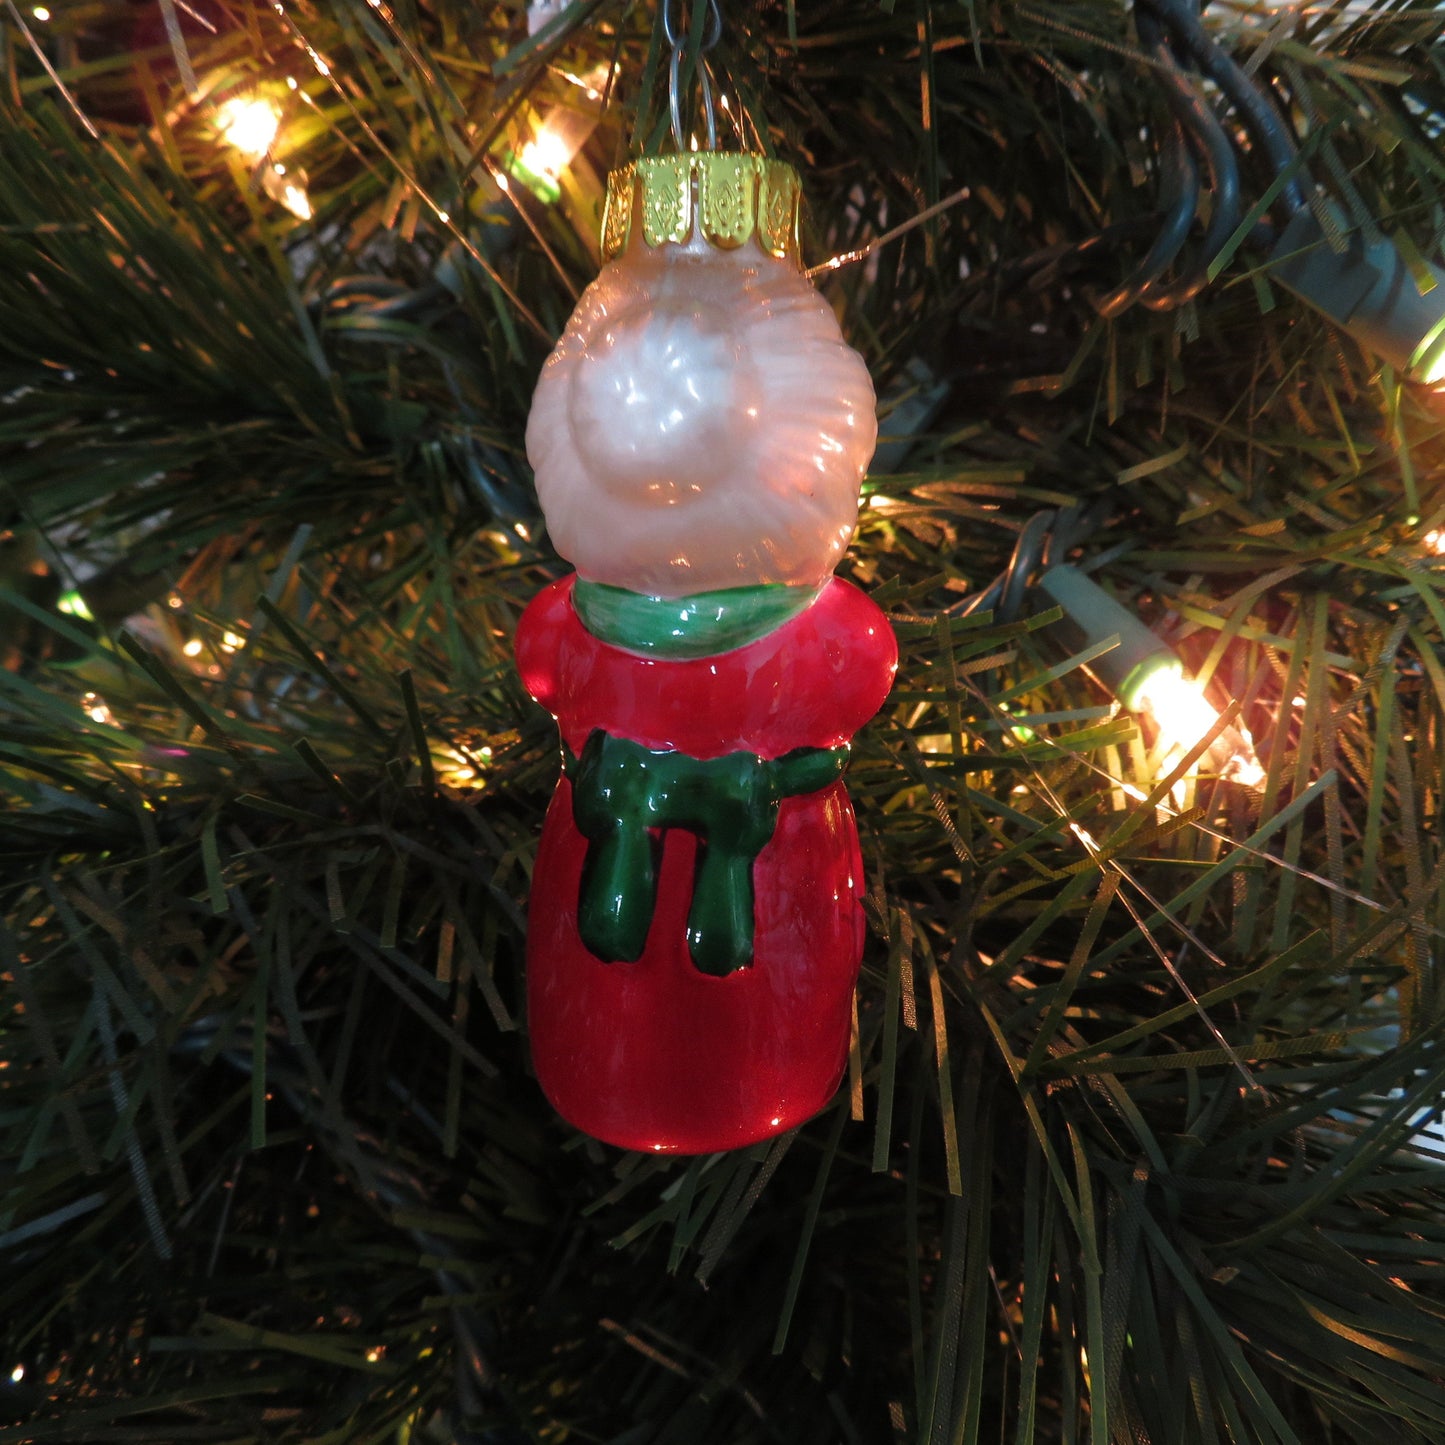 Vintage Mrs Claus Glass Painted Ornament Taiwan Snowman Red Dress Green Apron White Hair